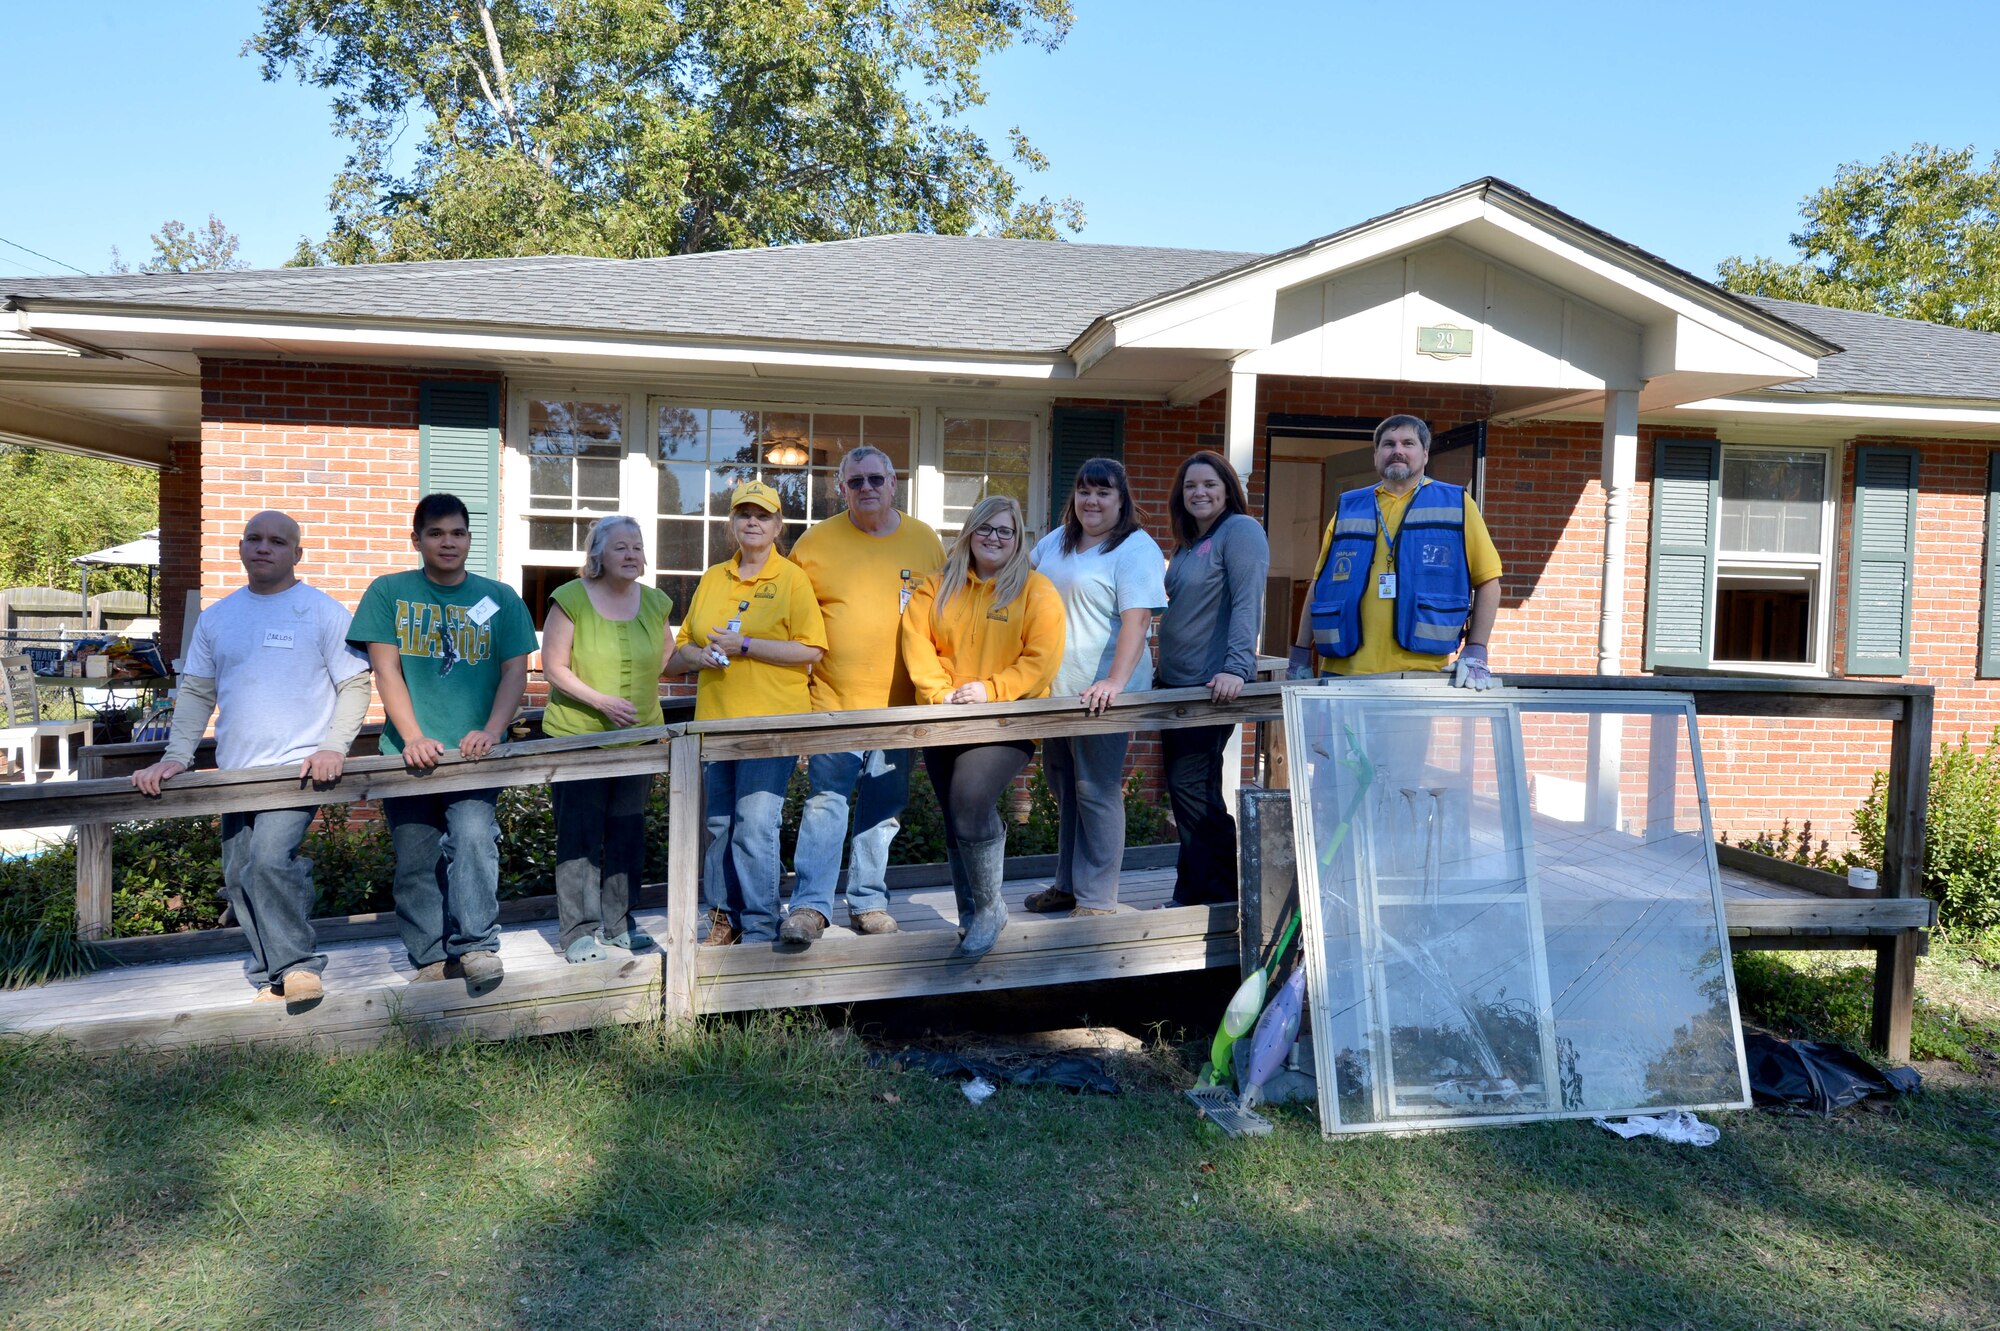 U.S. Air Force Airmen assigned to the 20th Fighter Wing and Southern Baptist Convention disaster relief members from Kentucky stand with homeowner Susan Bell during a disaster relief effort in Sumter, S.C., Oct. 19, 2015. Bell’s home was damaged by a flood caused by the storm resulting from Hurricane Joaquin, Oct. 4-5. (U.S. Air Force photo by Senior Airman Diana M. Cossaboom/Released)